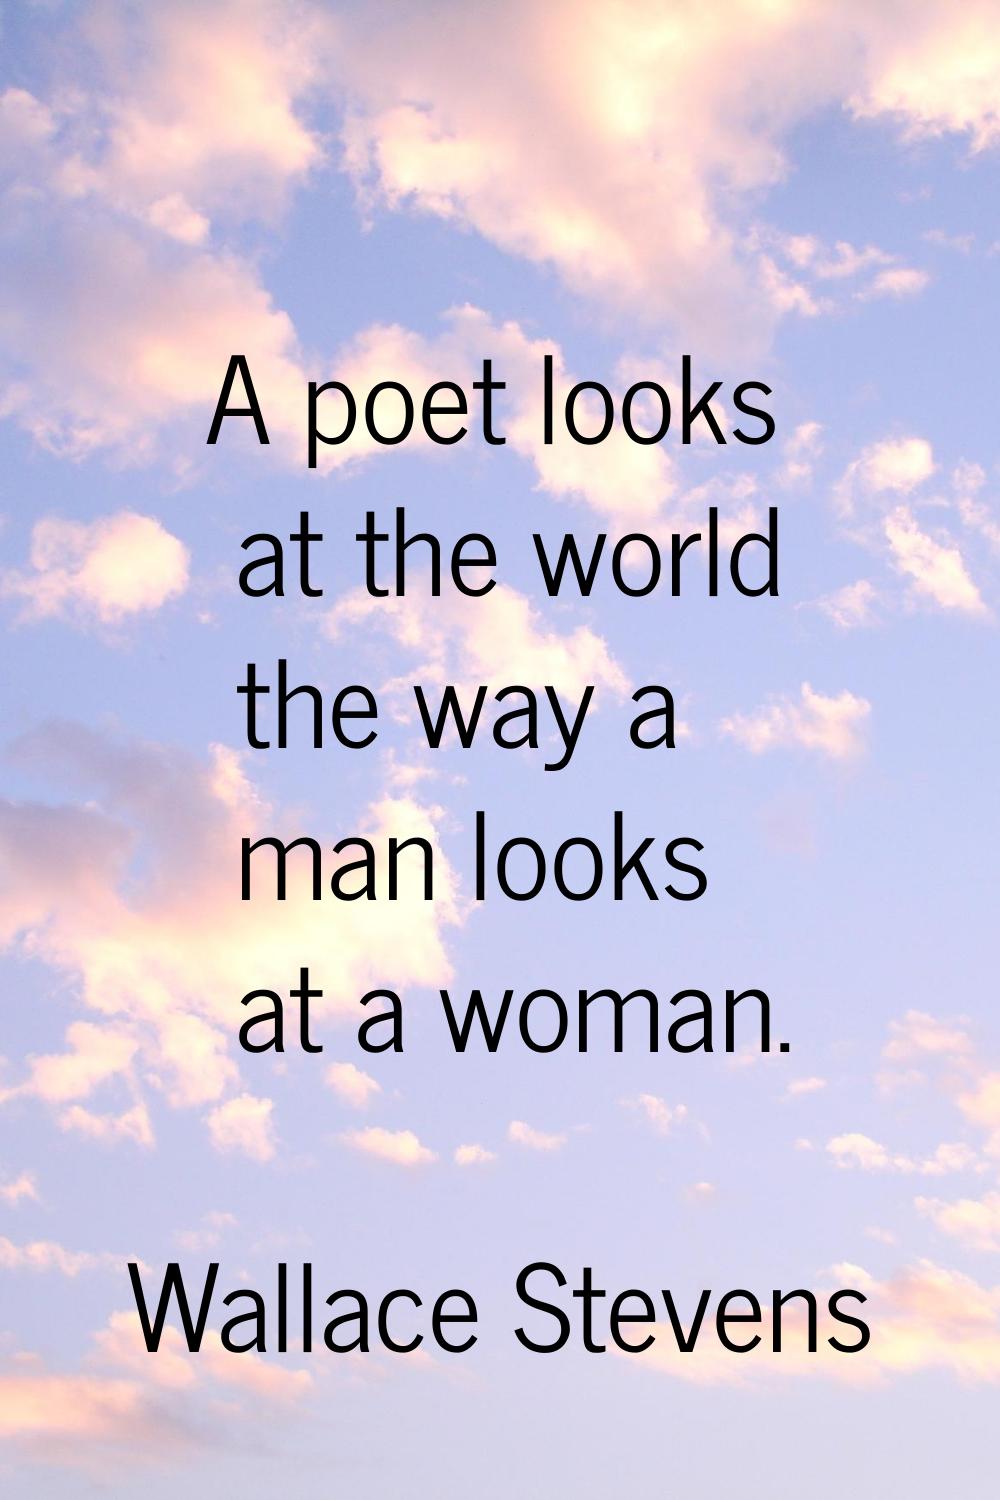 A poet looks at the world the way a man looks at a woman.